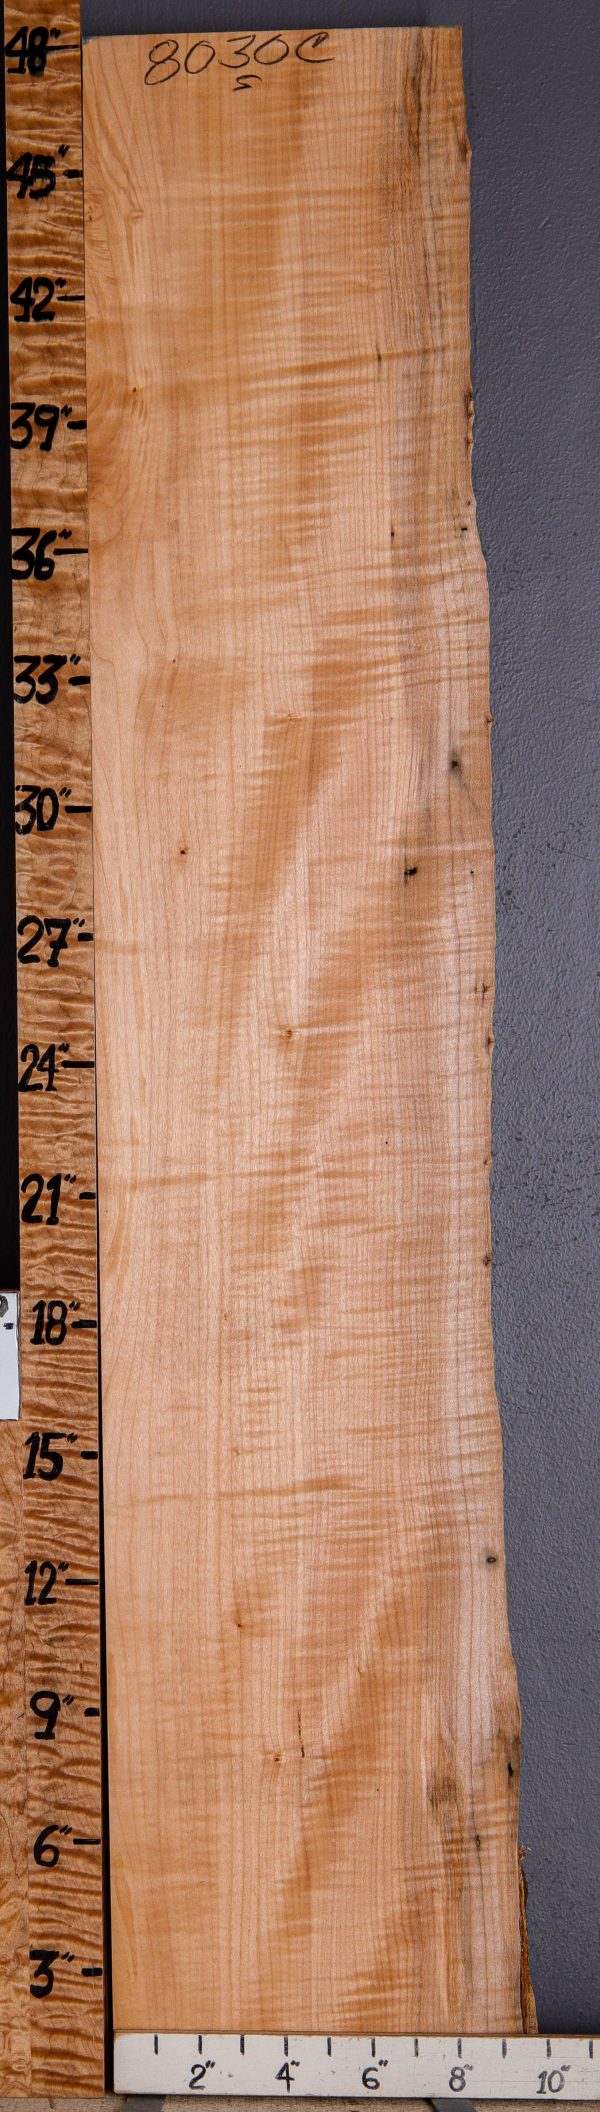 5A Curly Maple Lumber with Live Edge 8" X 48" X 8/4 (NWT-8030C)